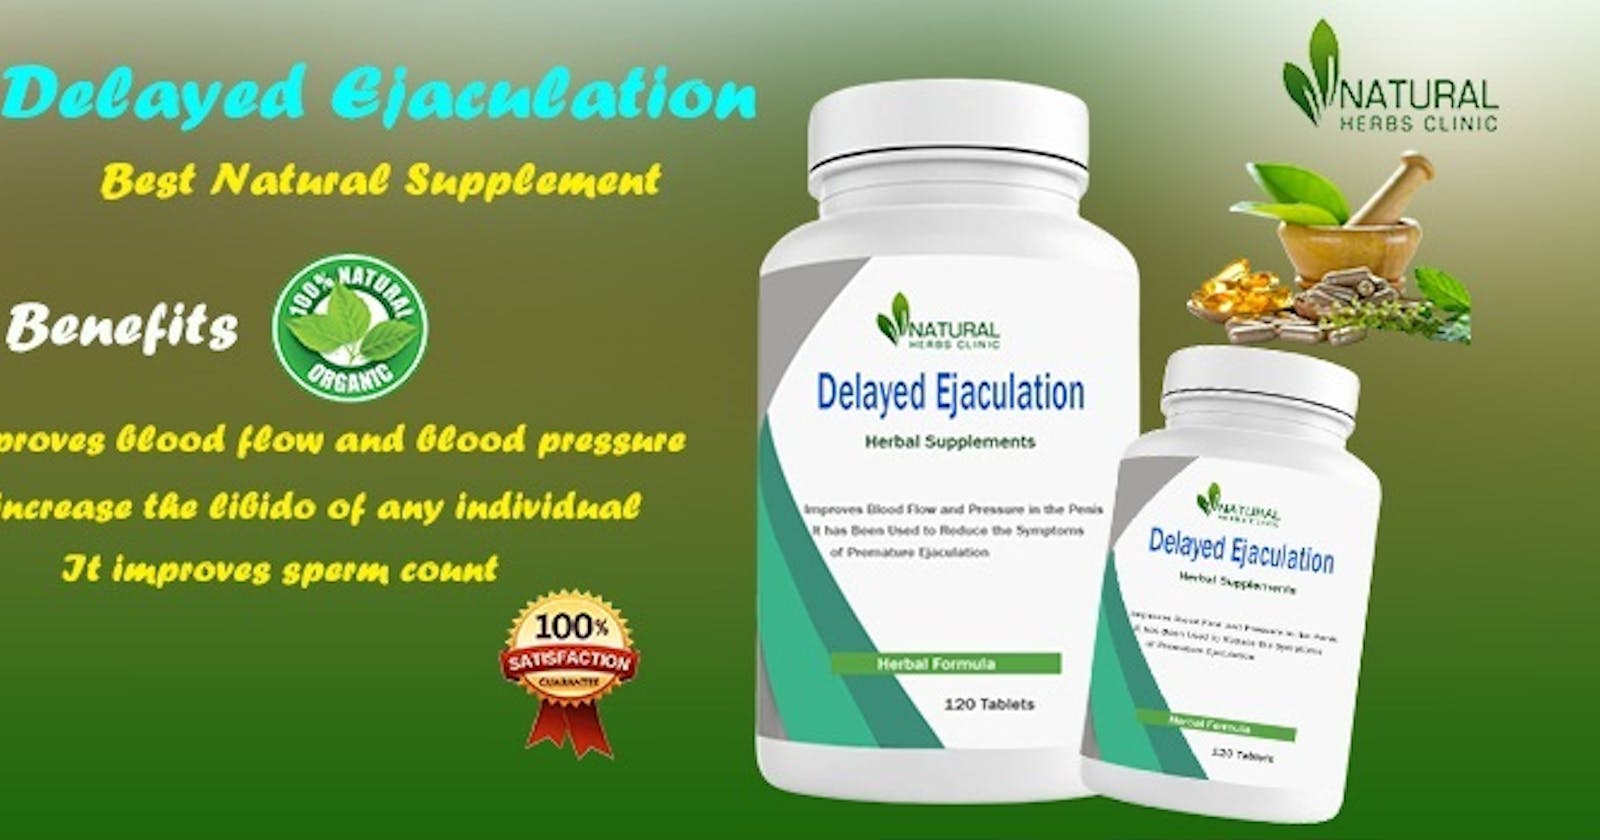 Delayed Ejaculation Natural Treatments: Your Key to Stay Fit